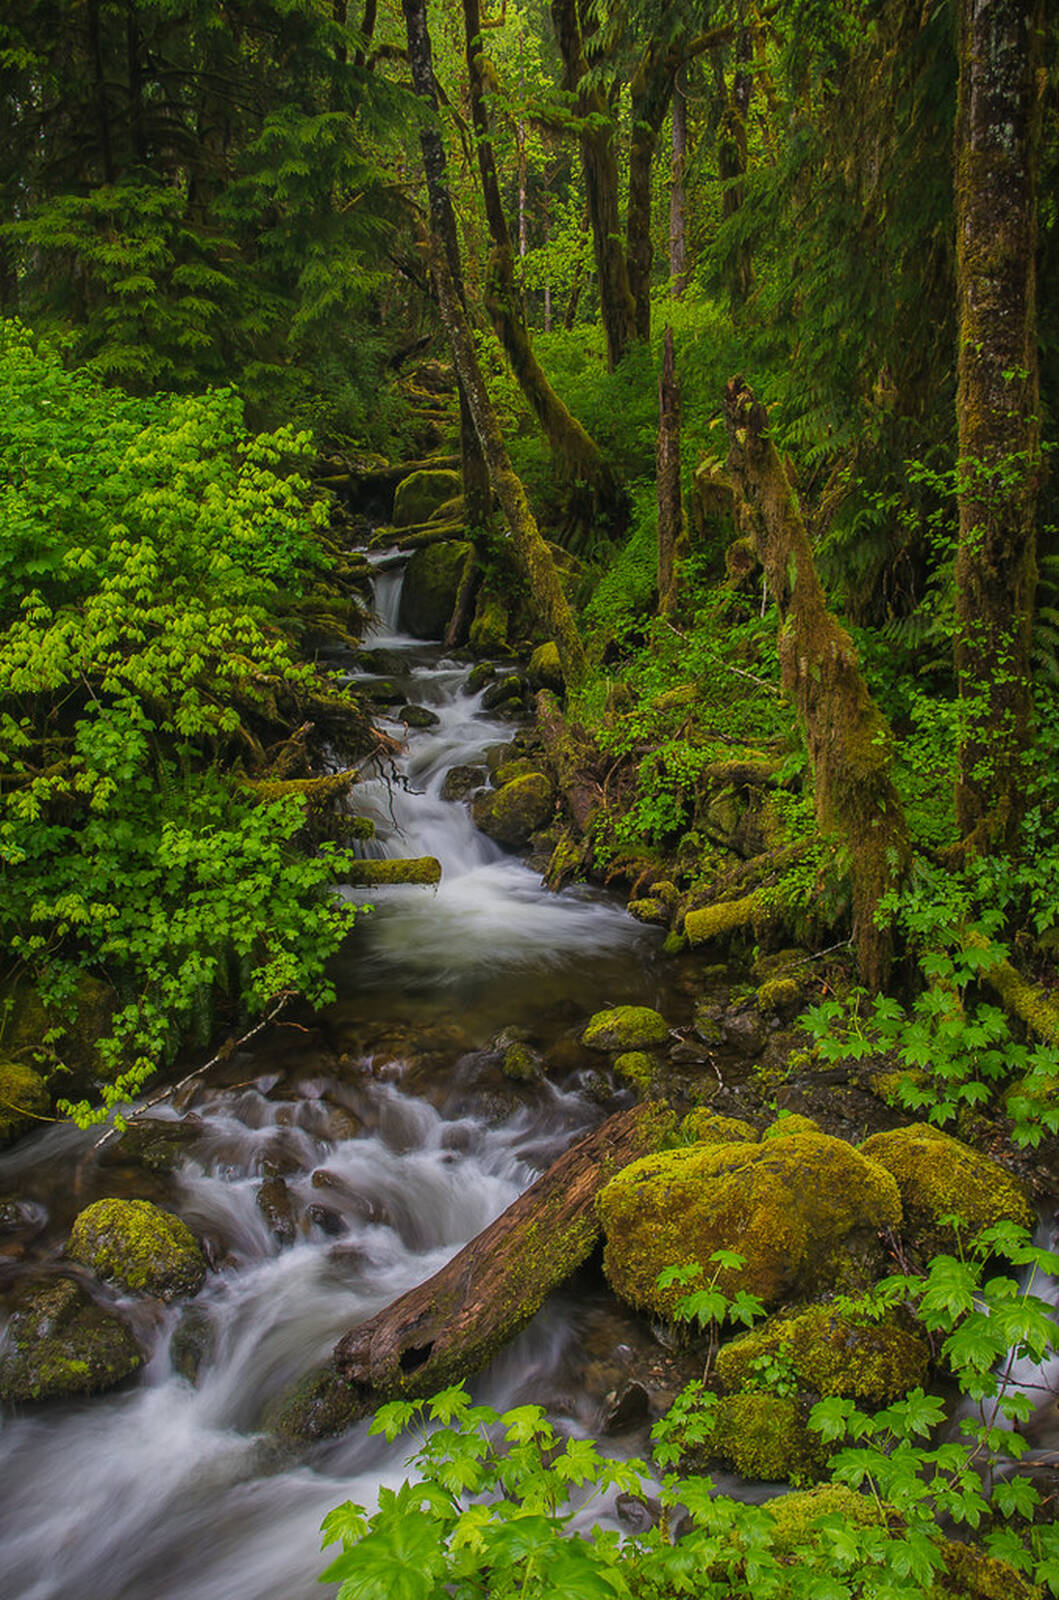 Image of Inner Creek within Quinault Rainforest by Murali Narayanan